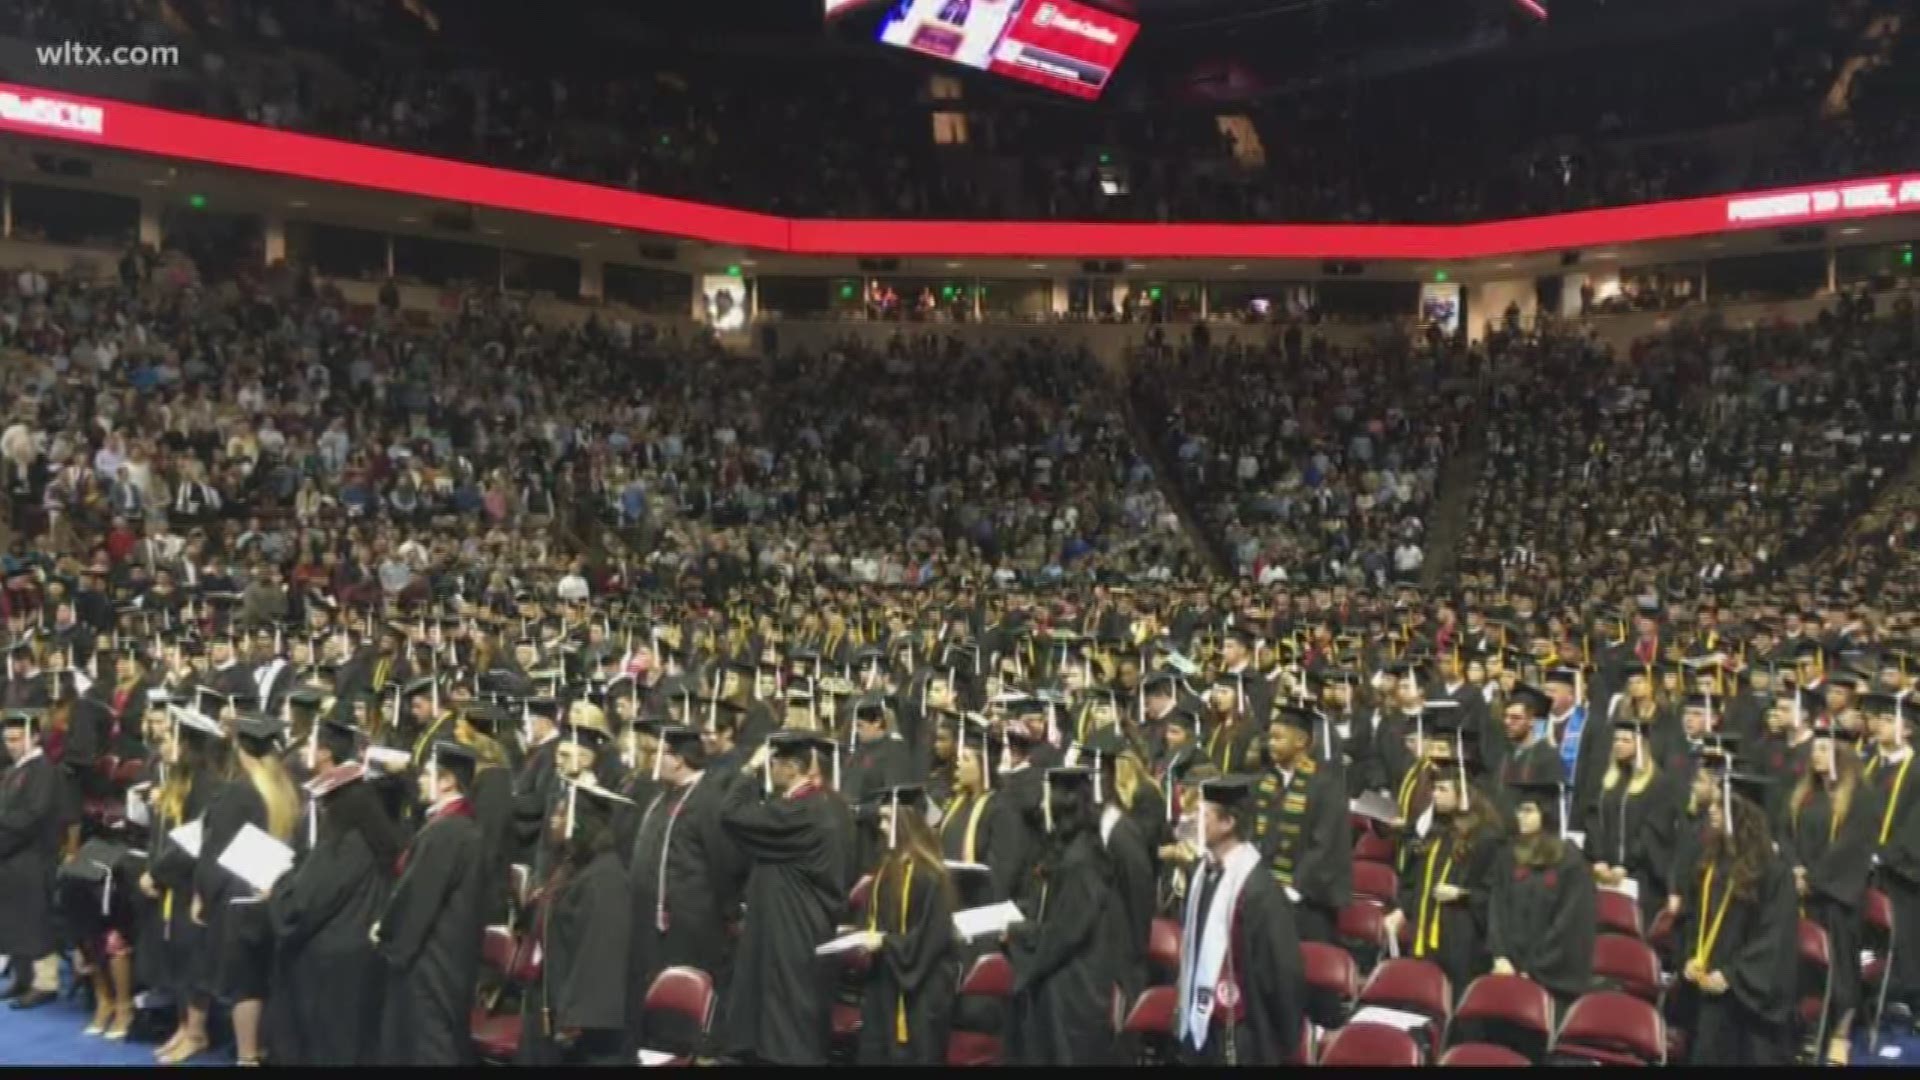 Hundreds cross the stage in USC's winter graduation